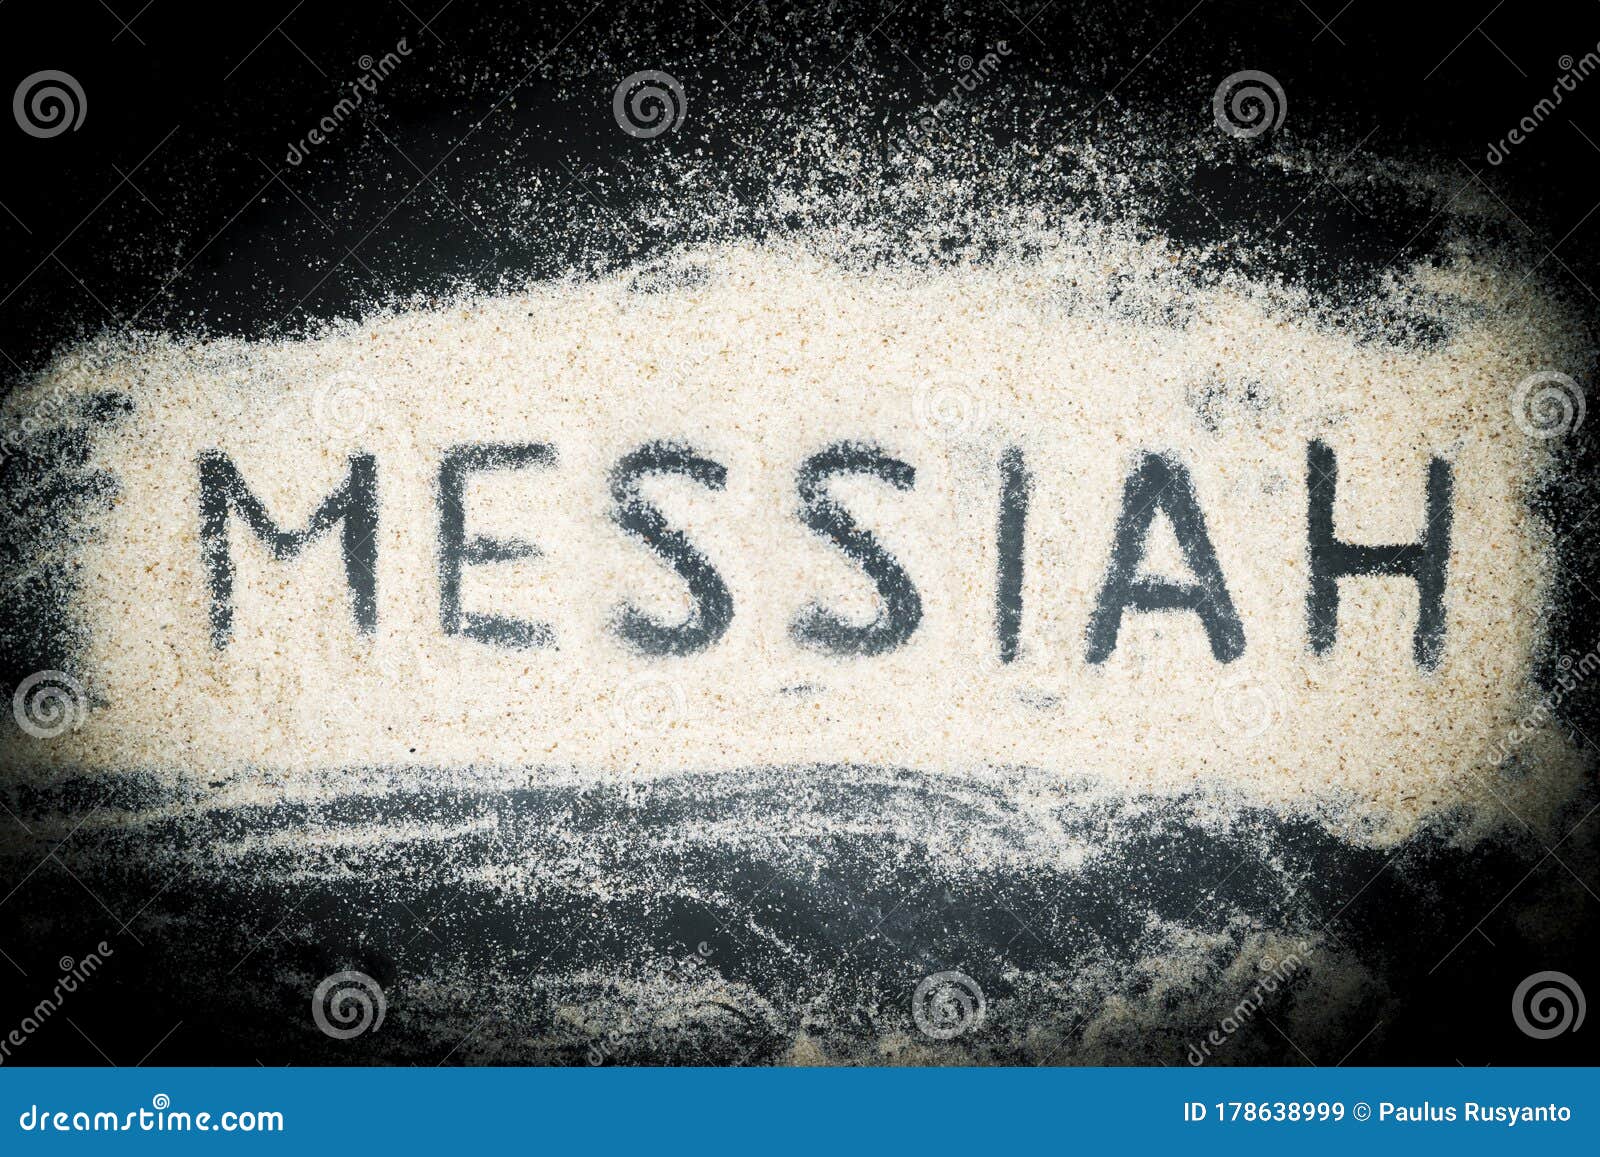 top view of messiah word written on sand